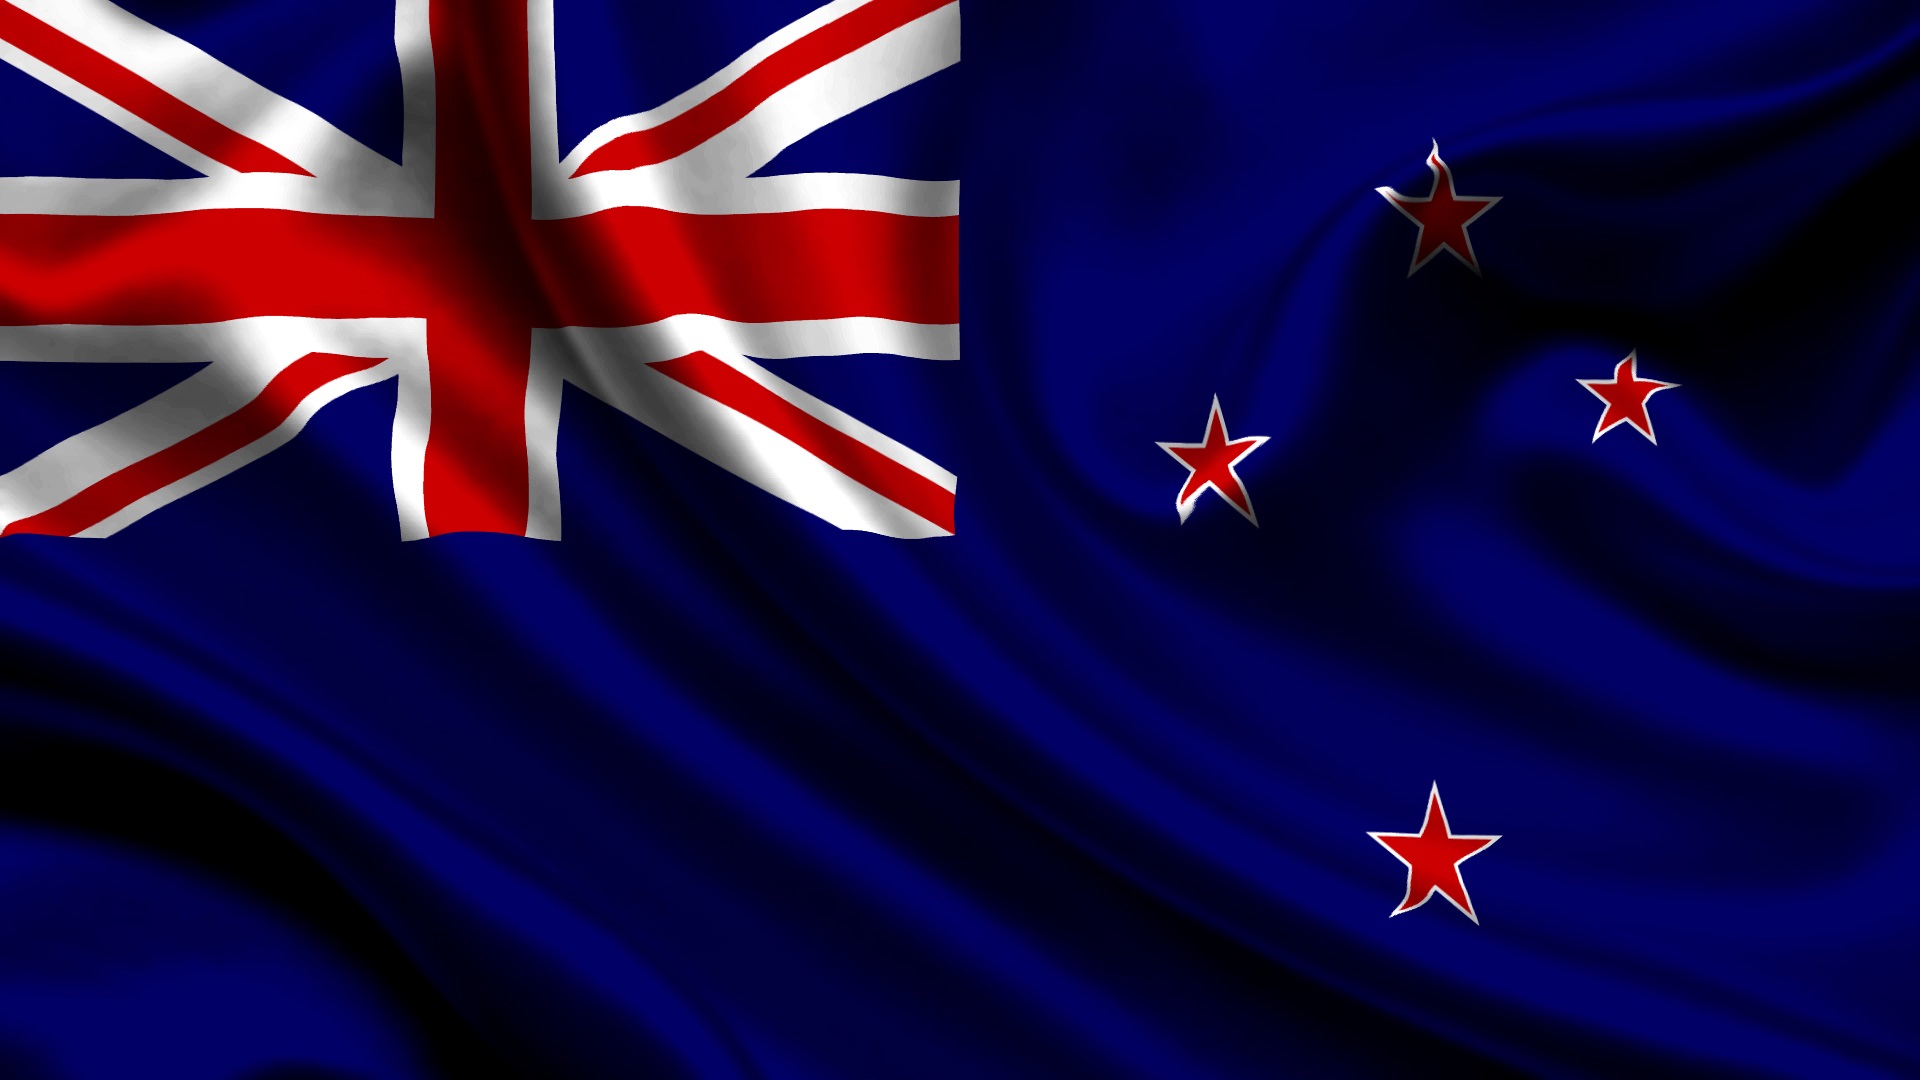 Wallpaper New Zealand flag 1920x1080 Full HD 2K Picture Image